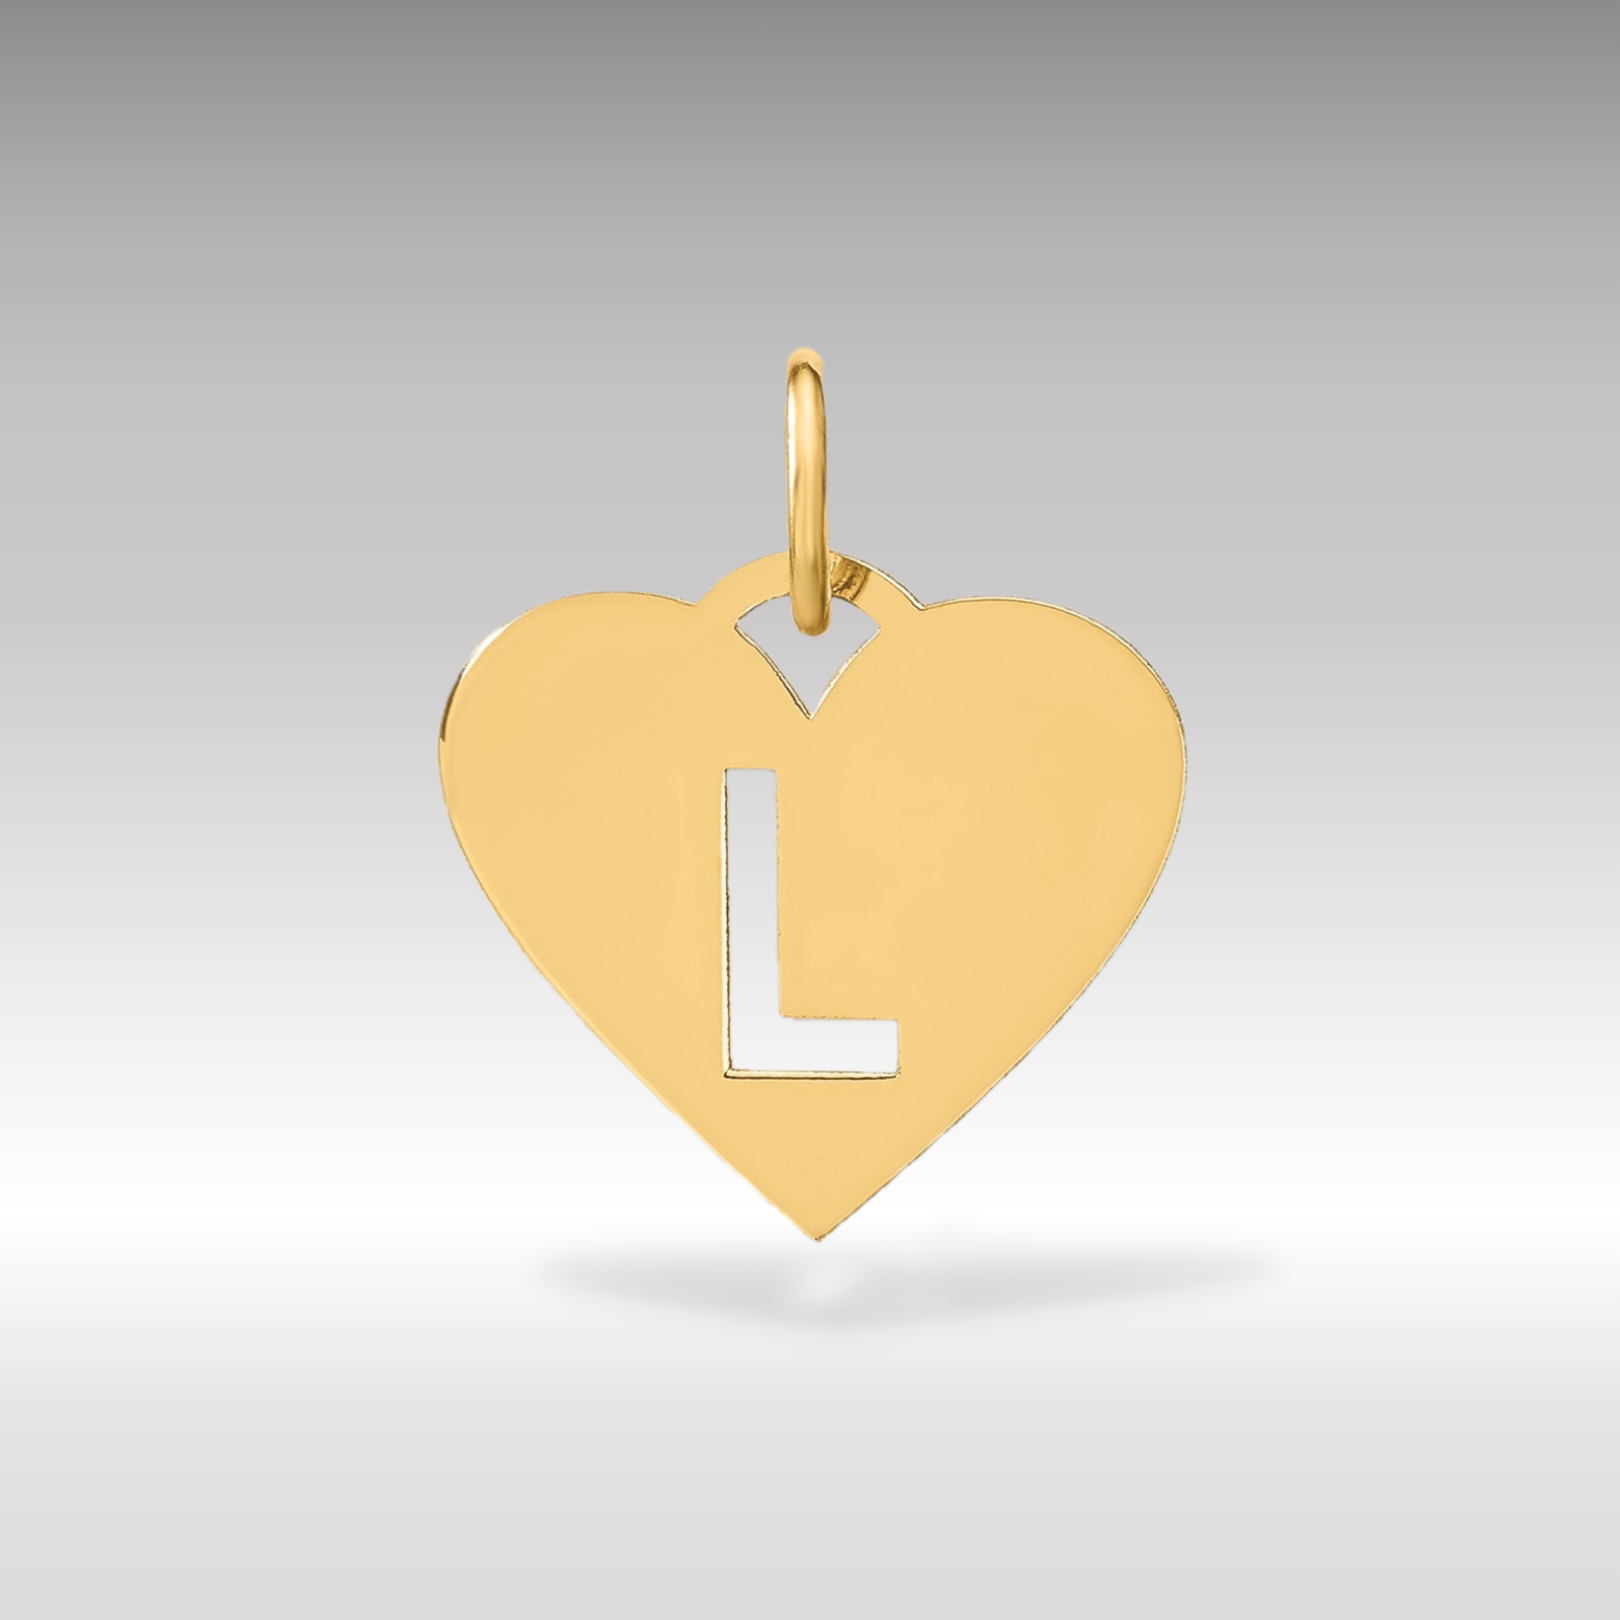 14K Gold Heart Pendant with Letter 'L' - Charlie & Co. Jewelry